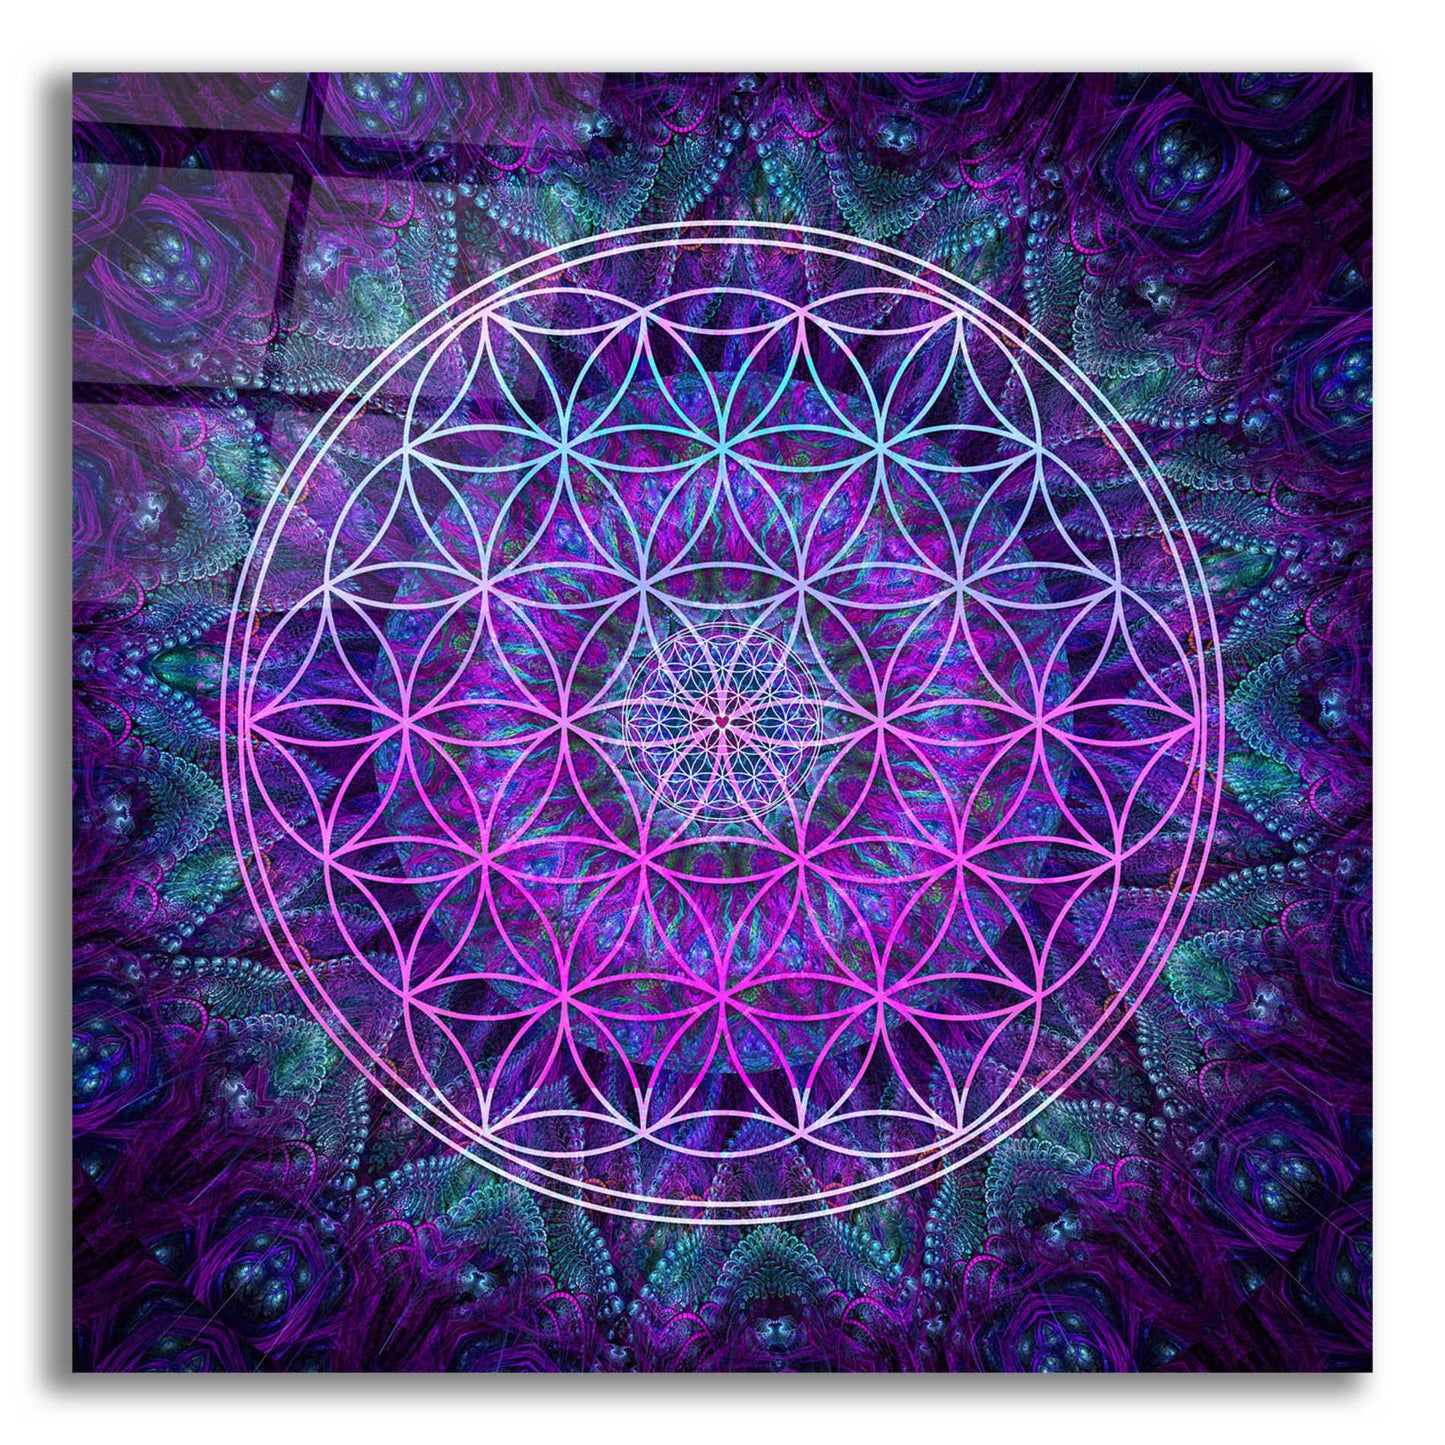 Epic Art 'Flower Of Life' by Cameron Gray Acrylic Glass Wall Art